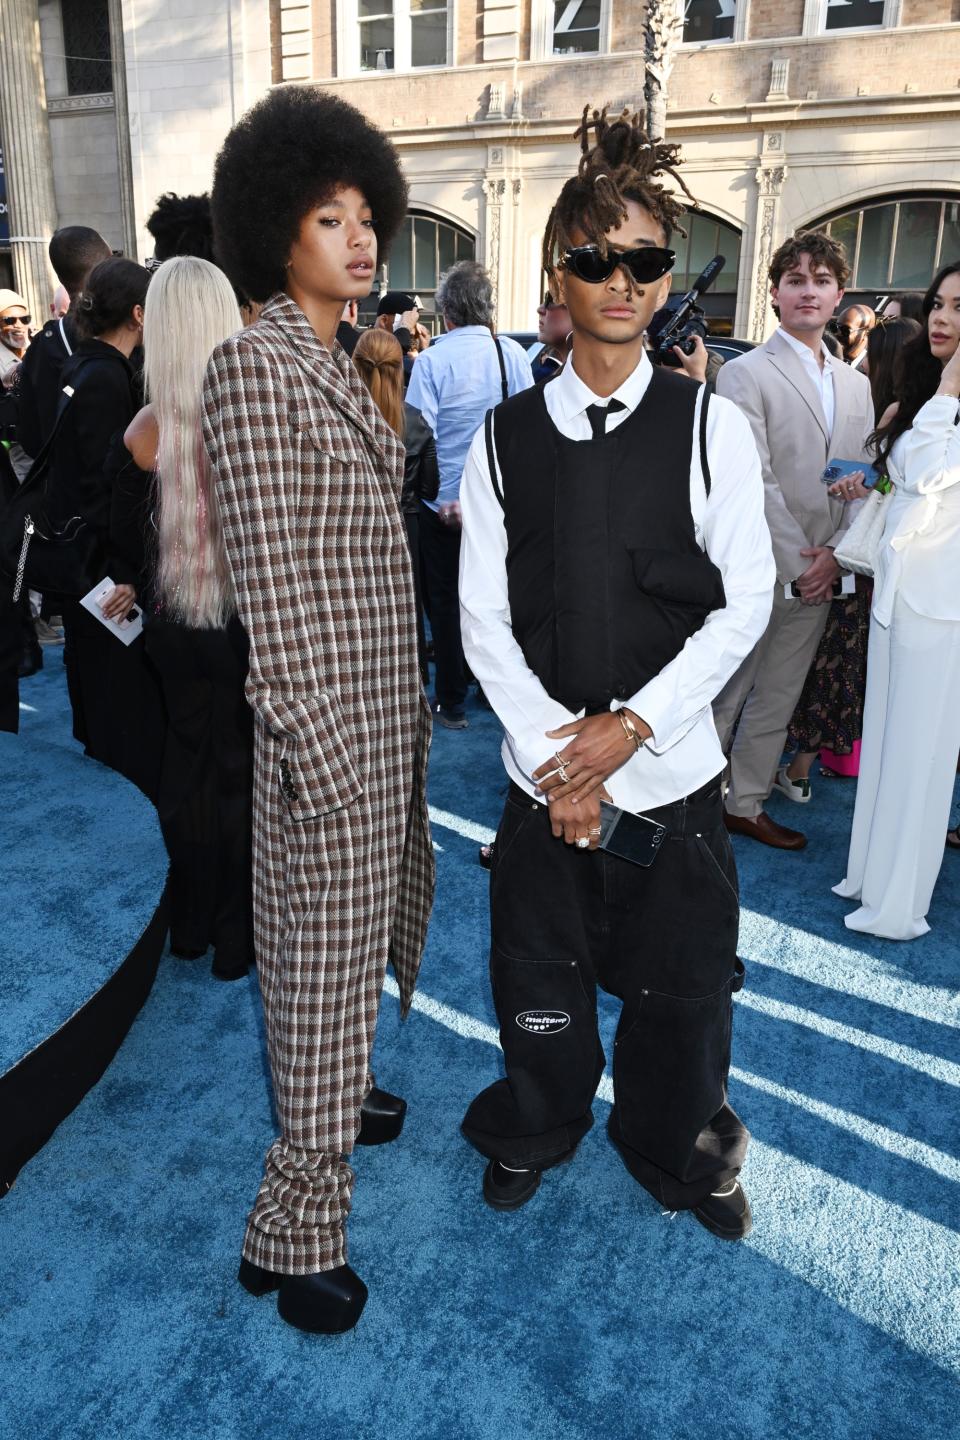 willow smith, jaden smith, Bad Boys: Ride or Die premiere red carpet outfit look style